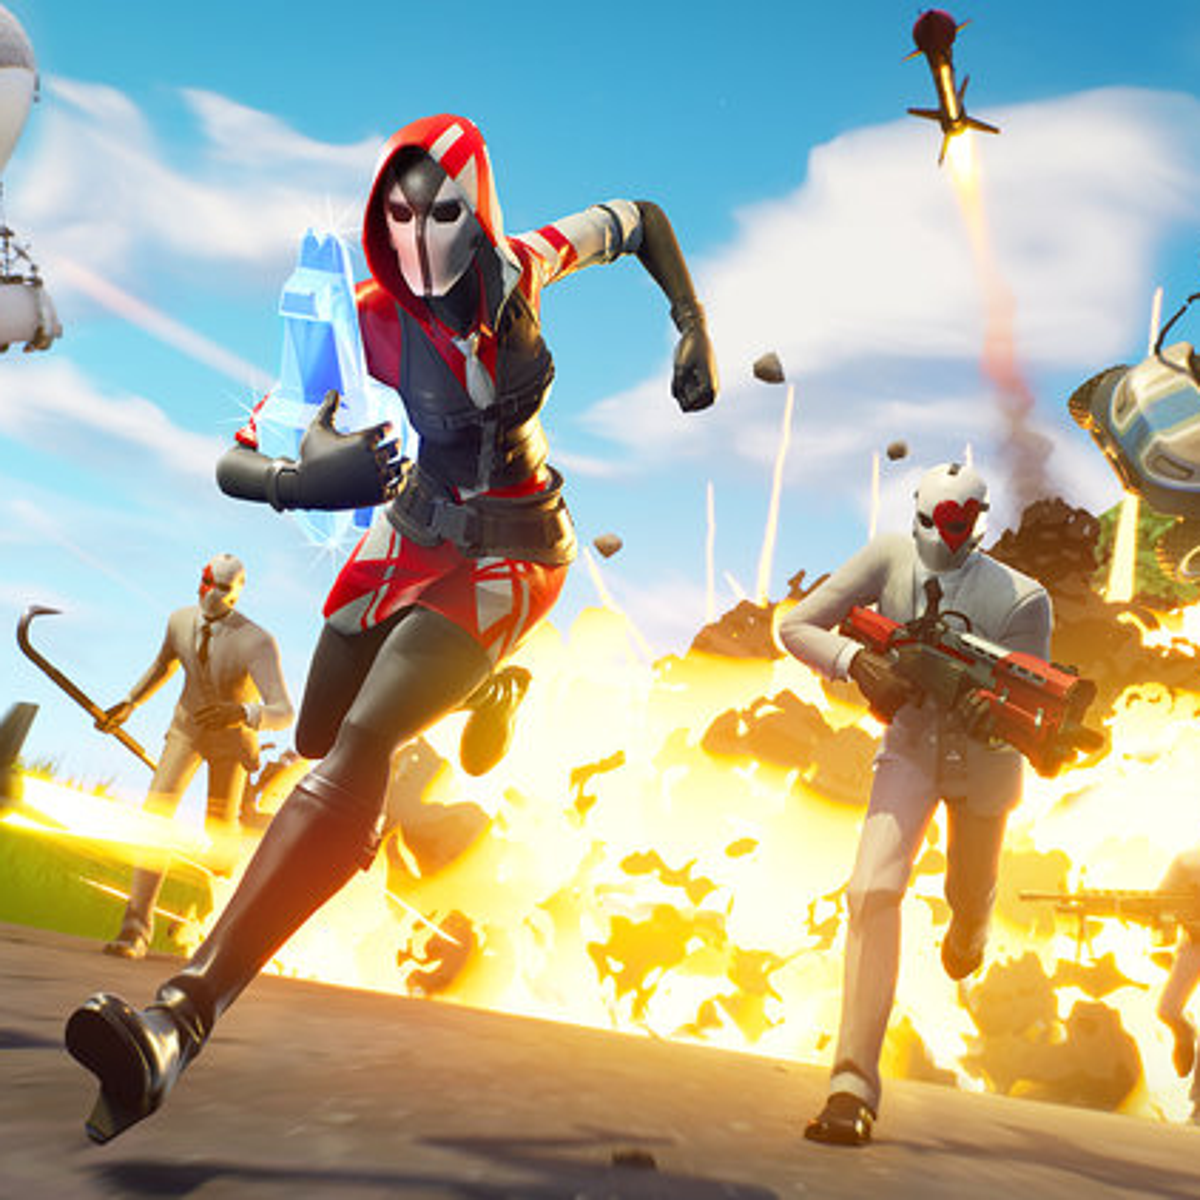 Google Loses Court Fight Over App Store With Makers of Fortnite - The New  York Times